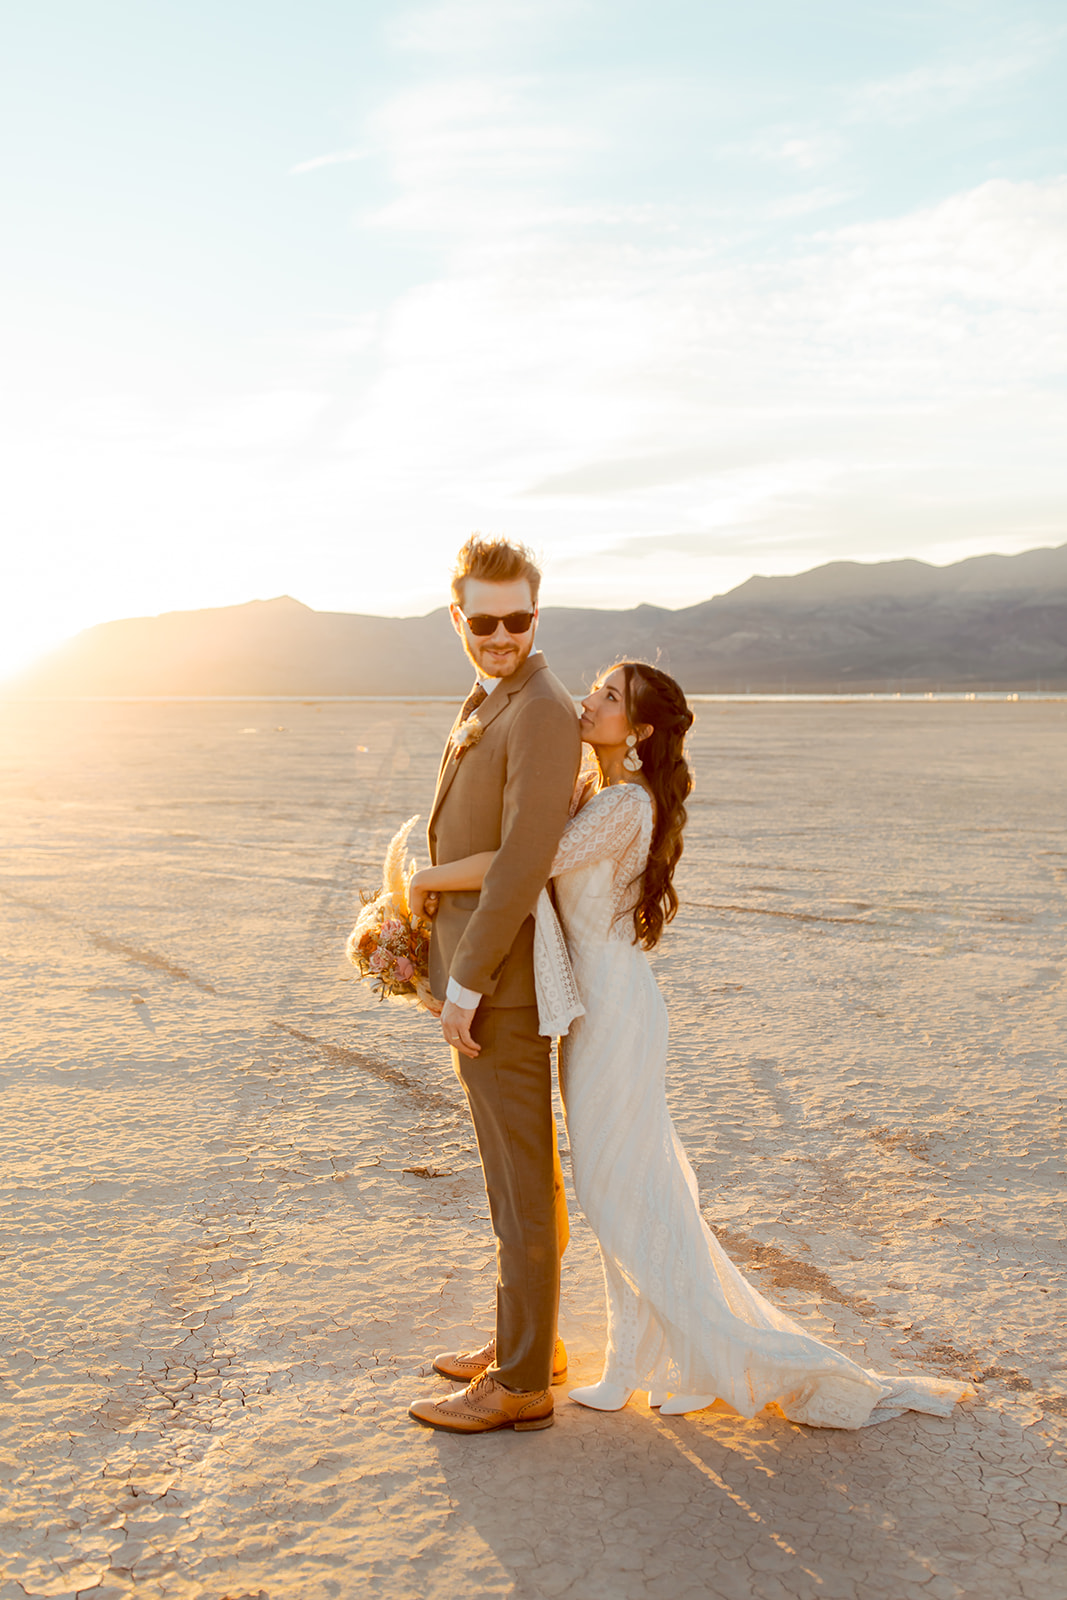 Bride and Groom on Dry Lake bed During Sunset 